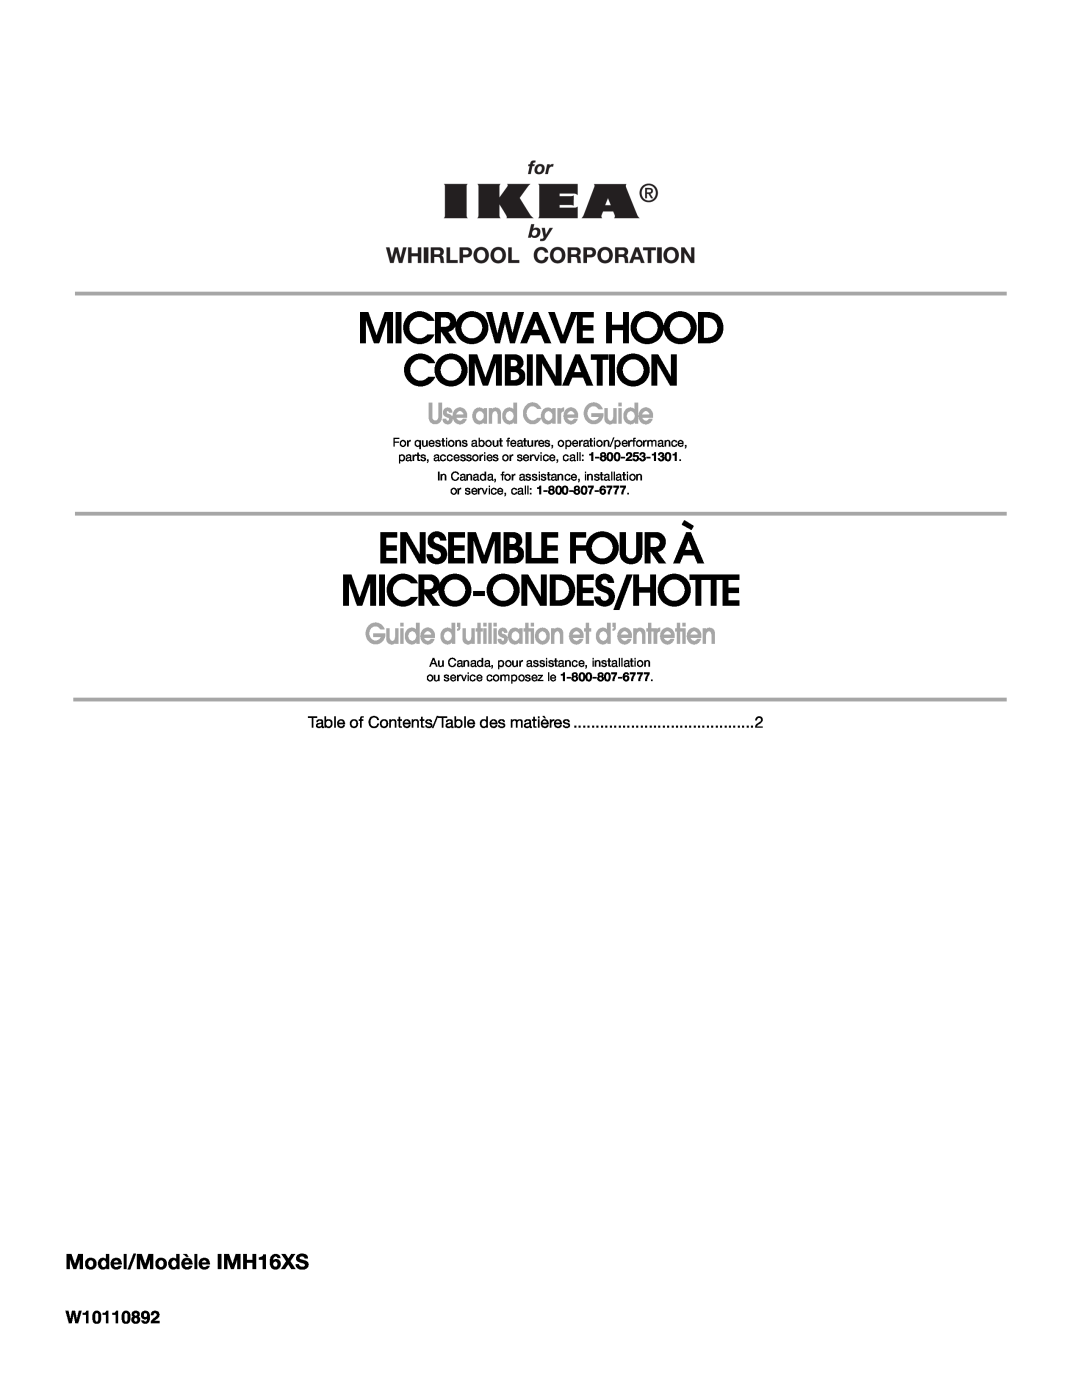 Whirlpool IMH16XS manual Microwave Hood Combination, Ensemble Four À Micro-Ondes/Hotte, Use and Care Guide, W10110892 